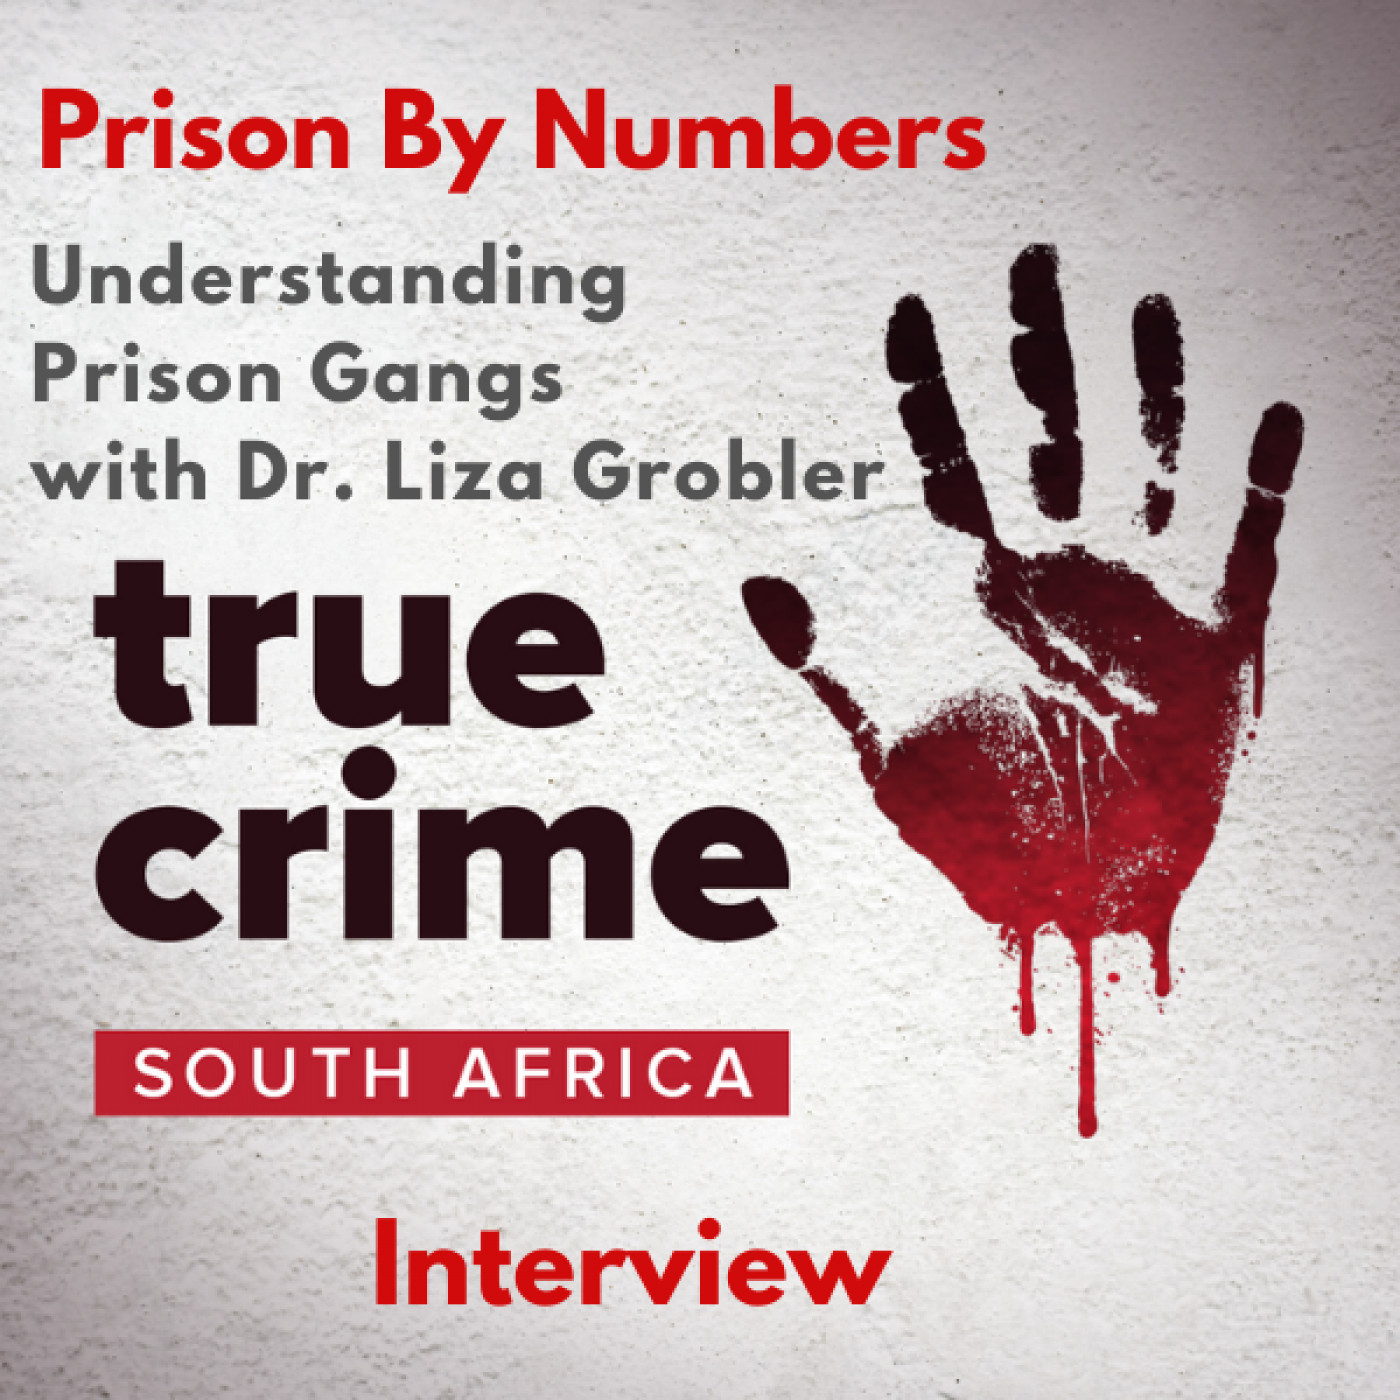 Prison By Numbers: Understanding Prison Gangs with Dr. Liza Grobler